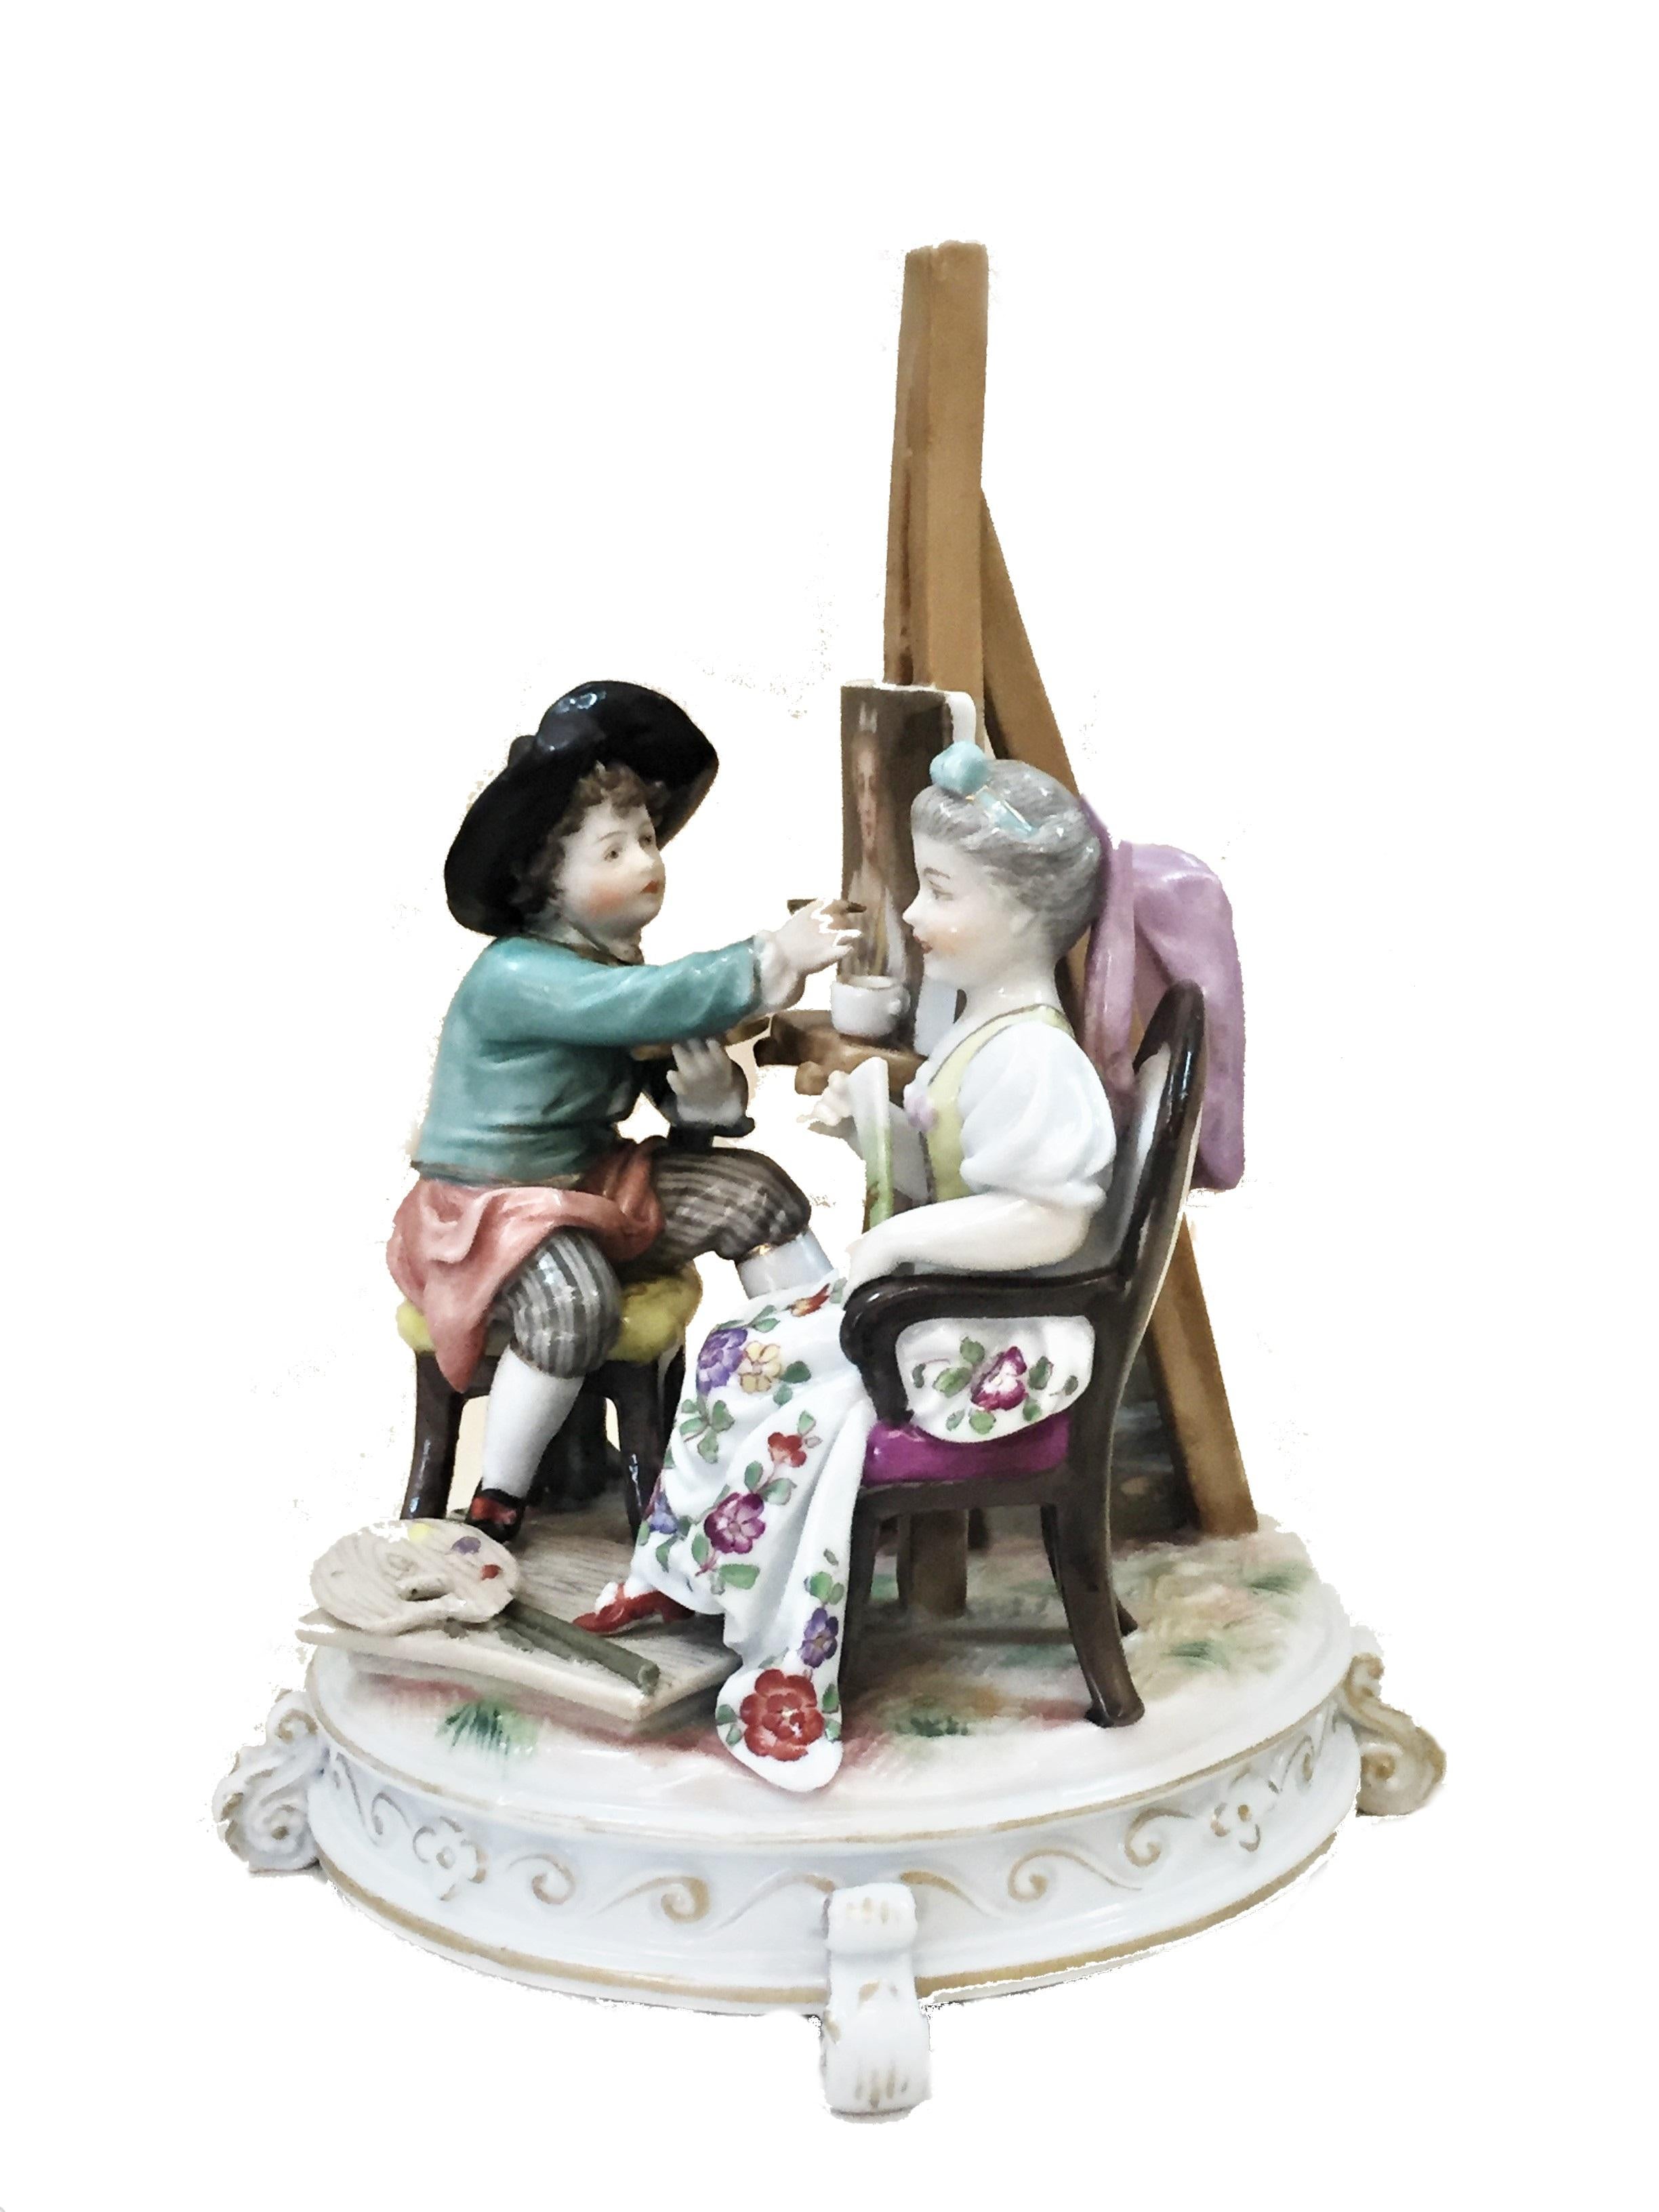 This porcelain group produced by Richard Eckert & Co., unique in its rare and non-banal composition, depicts an unusual genre scene - the artist paints a portrait of a model sitting in front of him. The detailed furnishings of the artist’s workshop